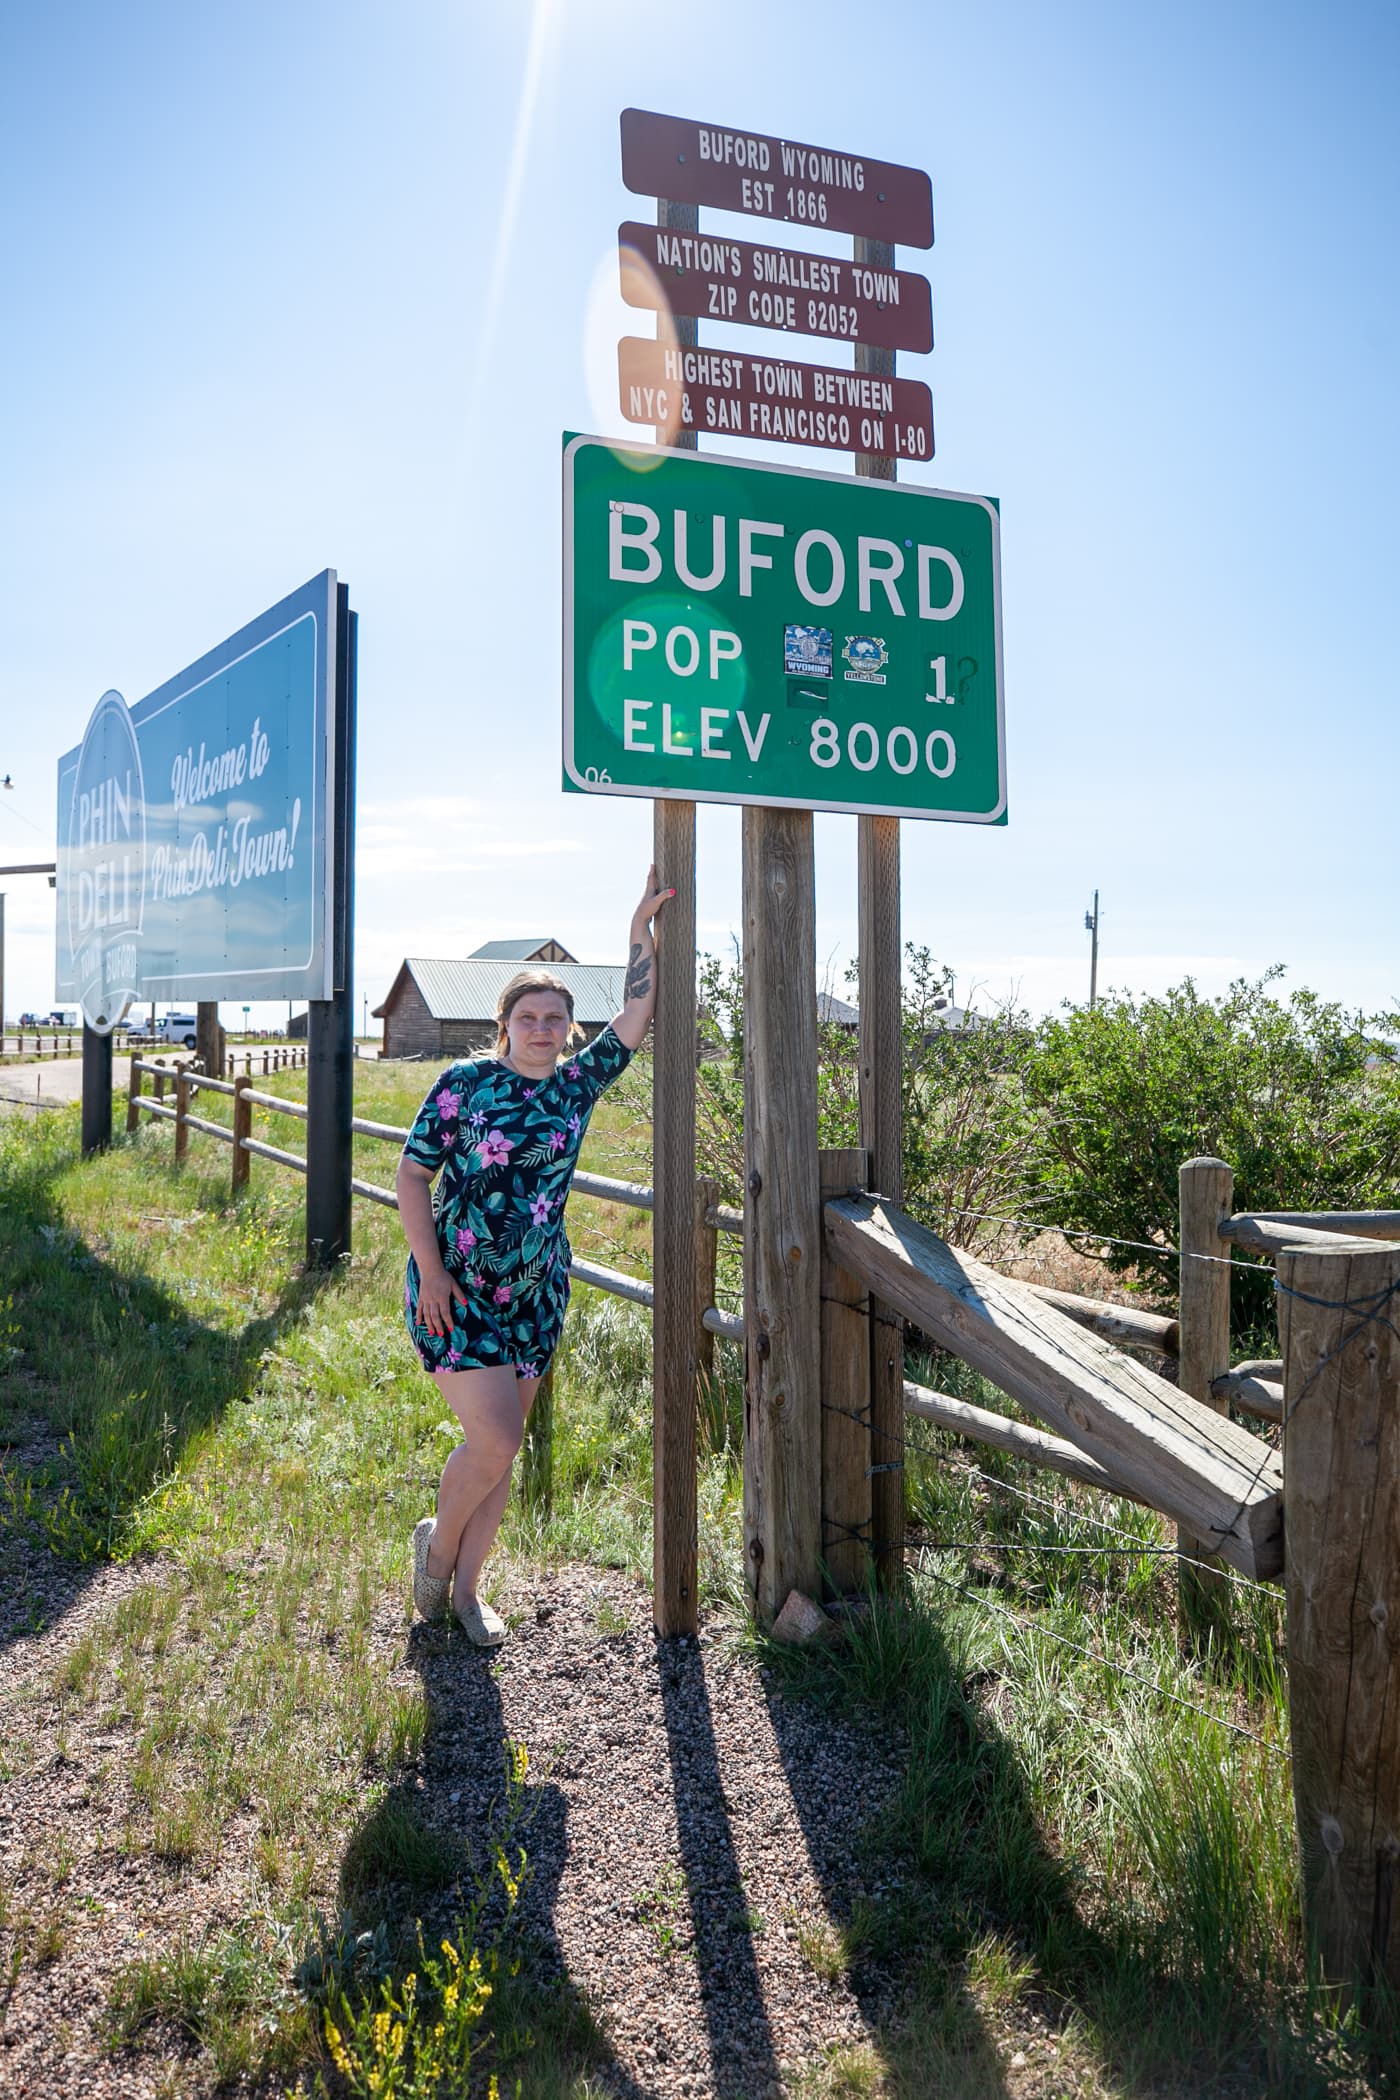 Buford, Wyoming: The Smallest Town in America with a population of 1 | Wyoming Roadside Attractions